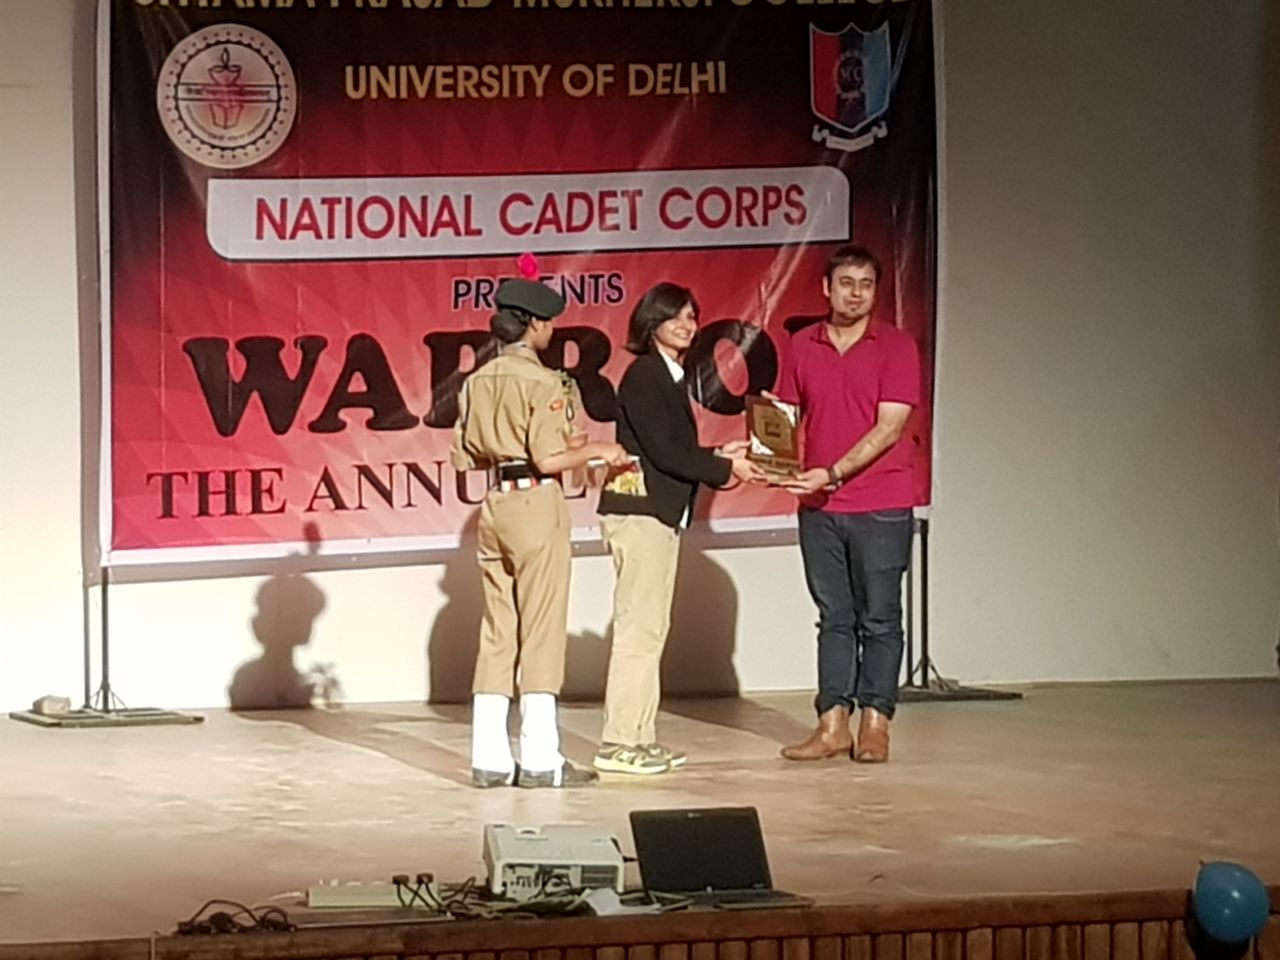 Honoured as a Chief Guest at NCC Annual Fest Warrior 2k18 at Shyama Prasad Mukherjee College.